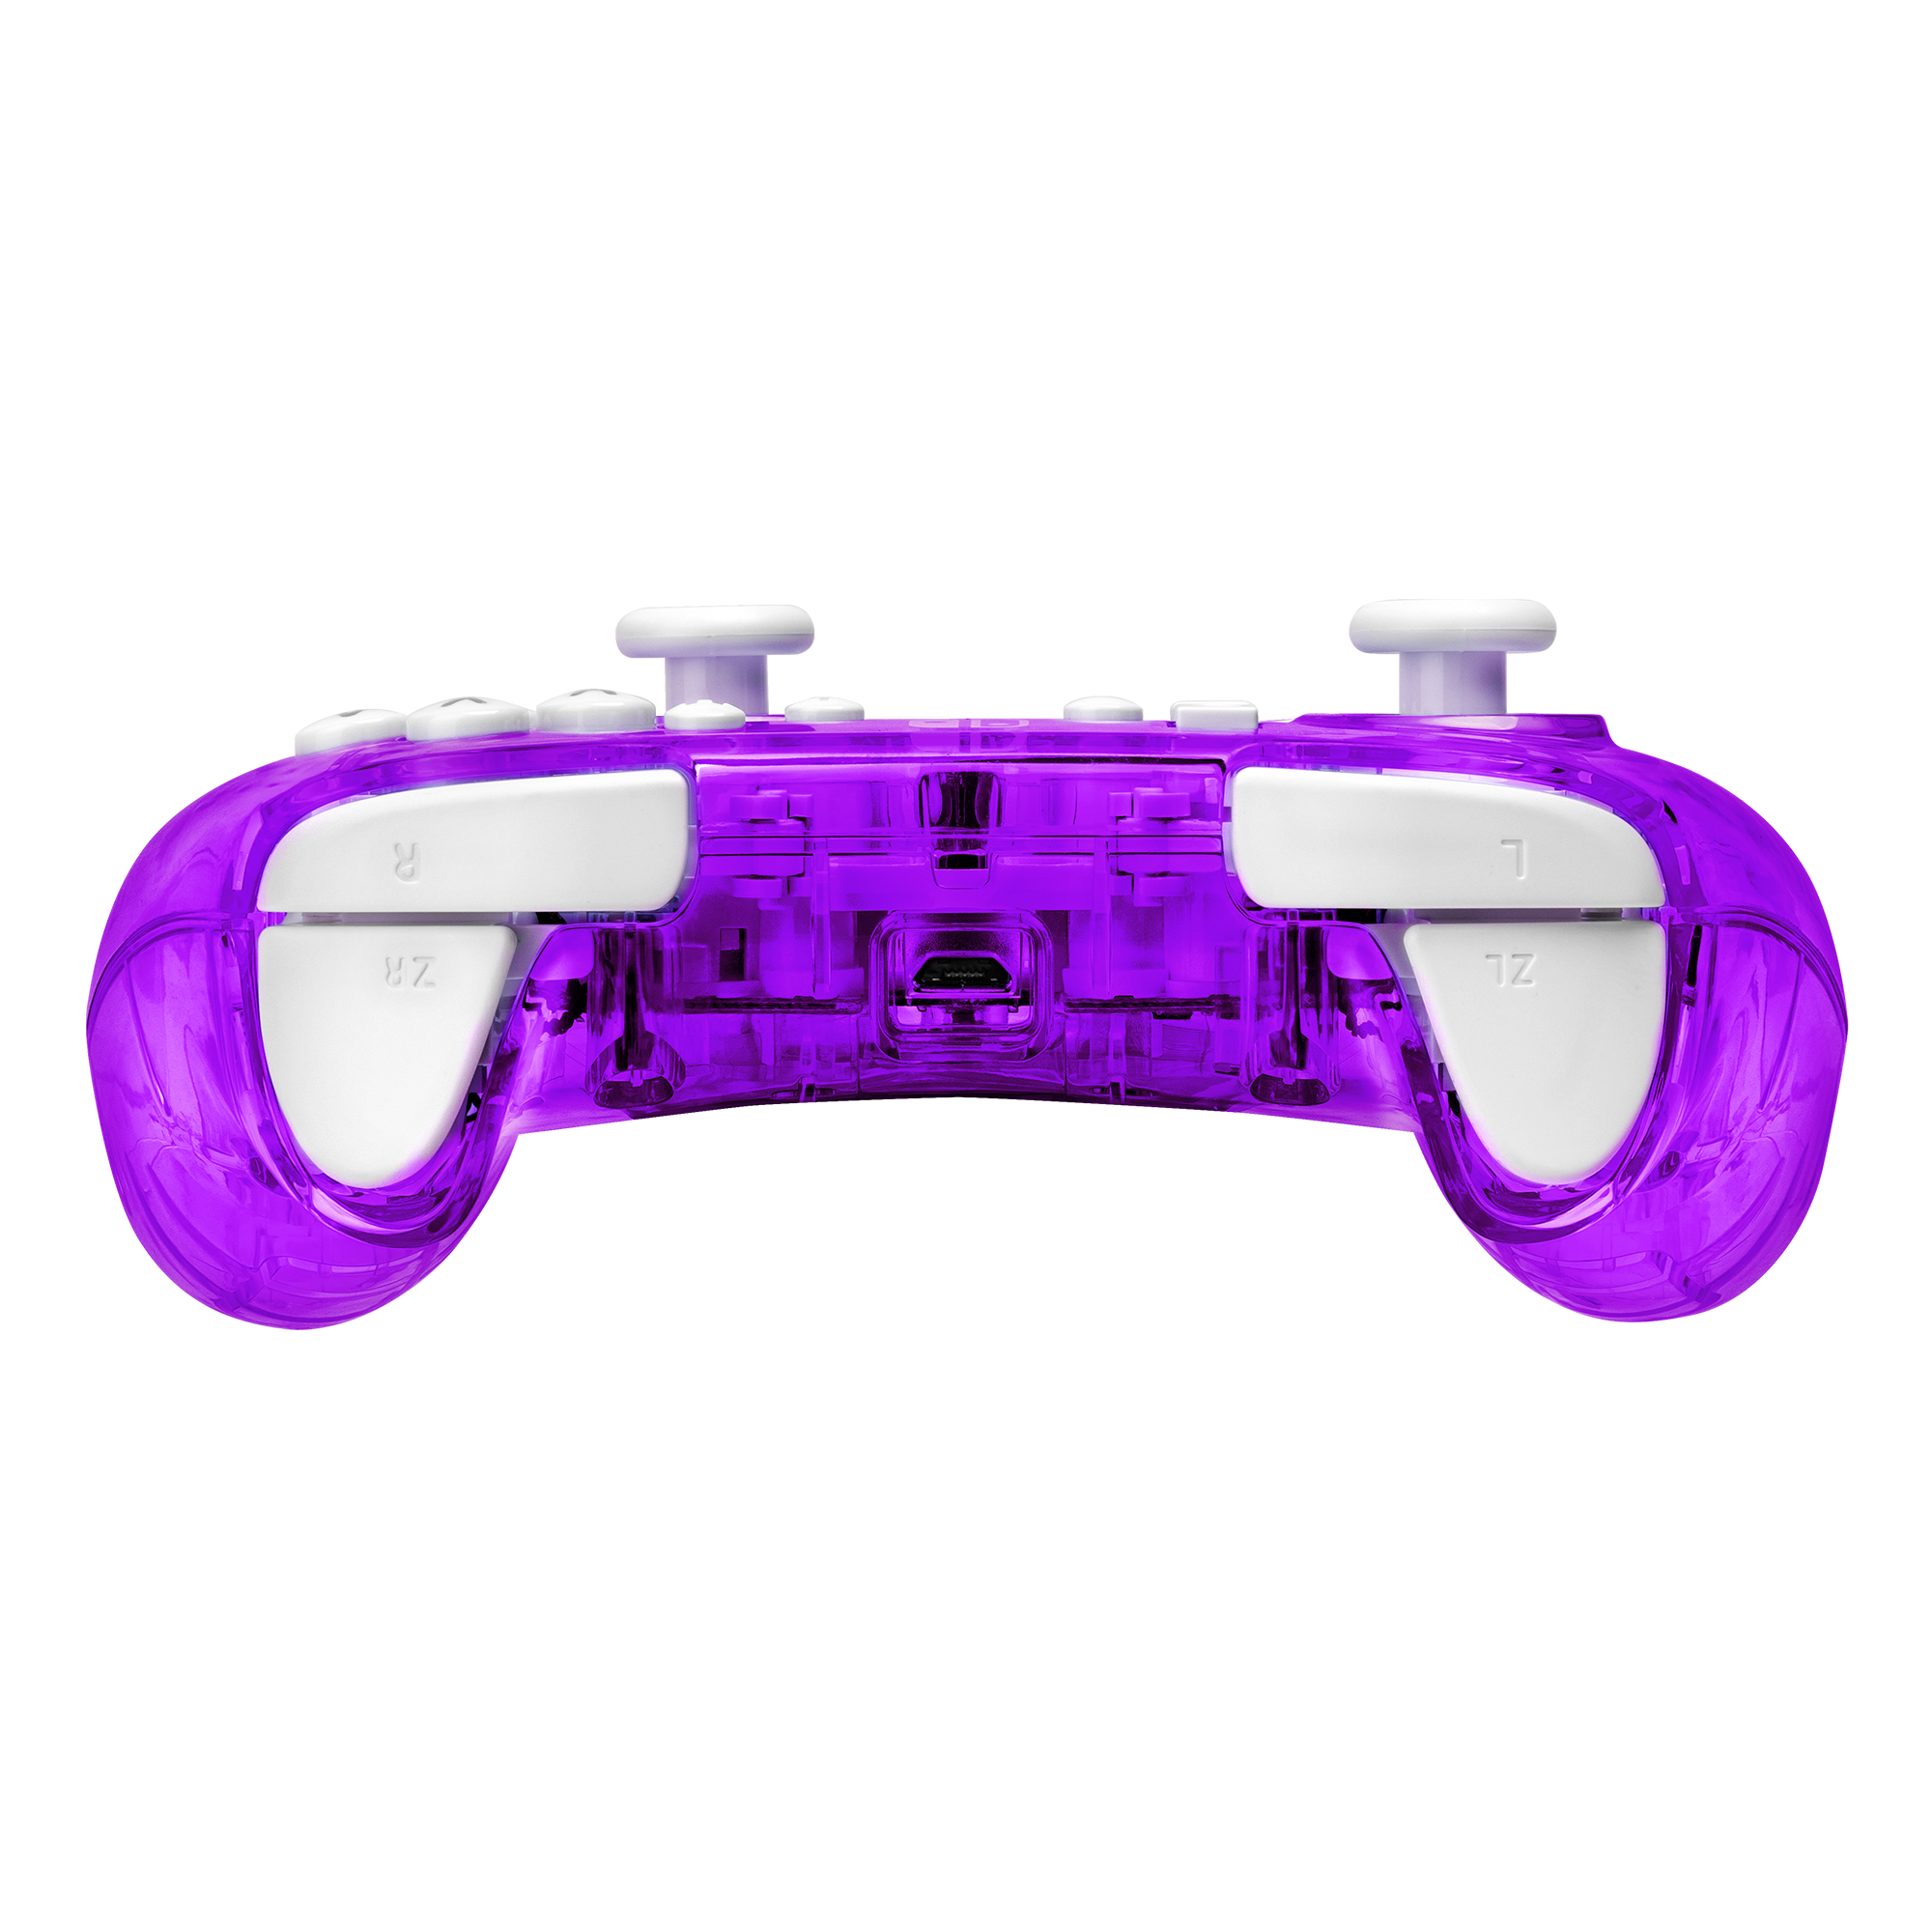 list item 4 of 7 PDP Rock Candy Wired Controller for Nintendo Switch - Cosmo Berry